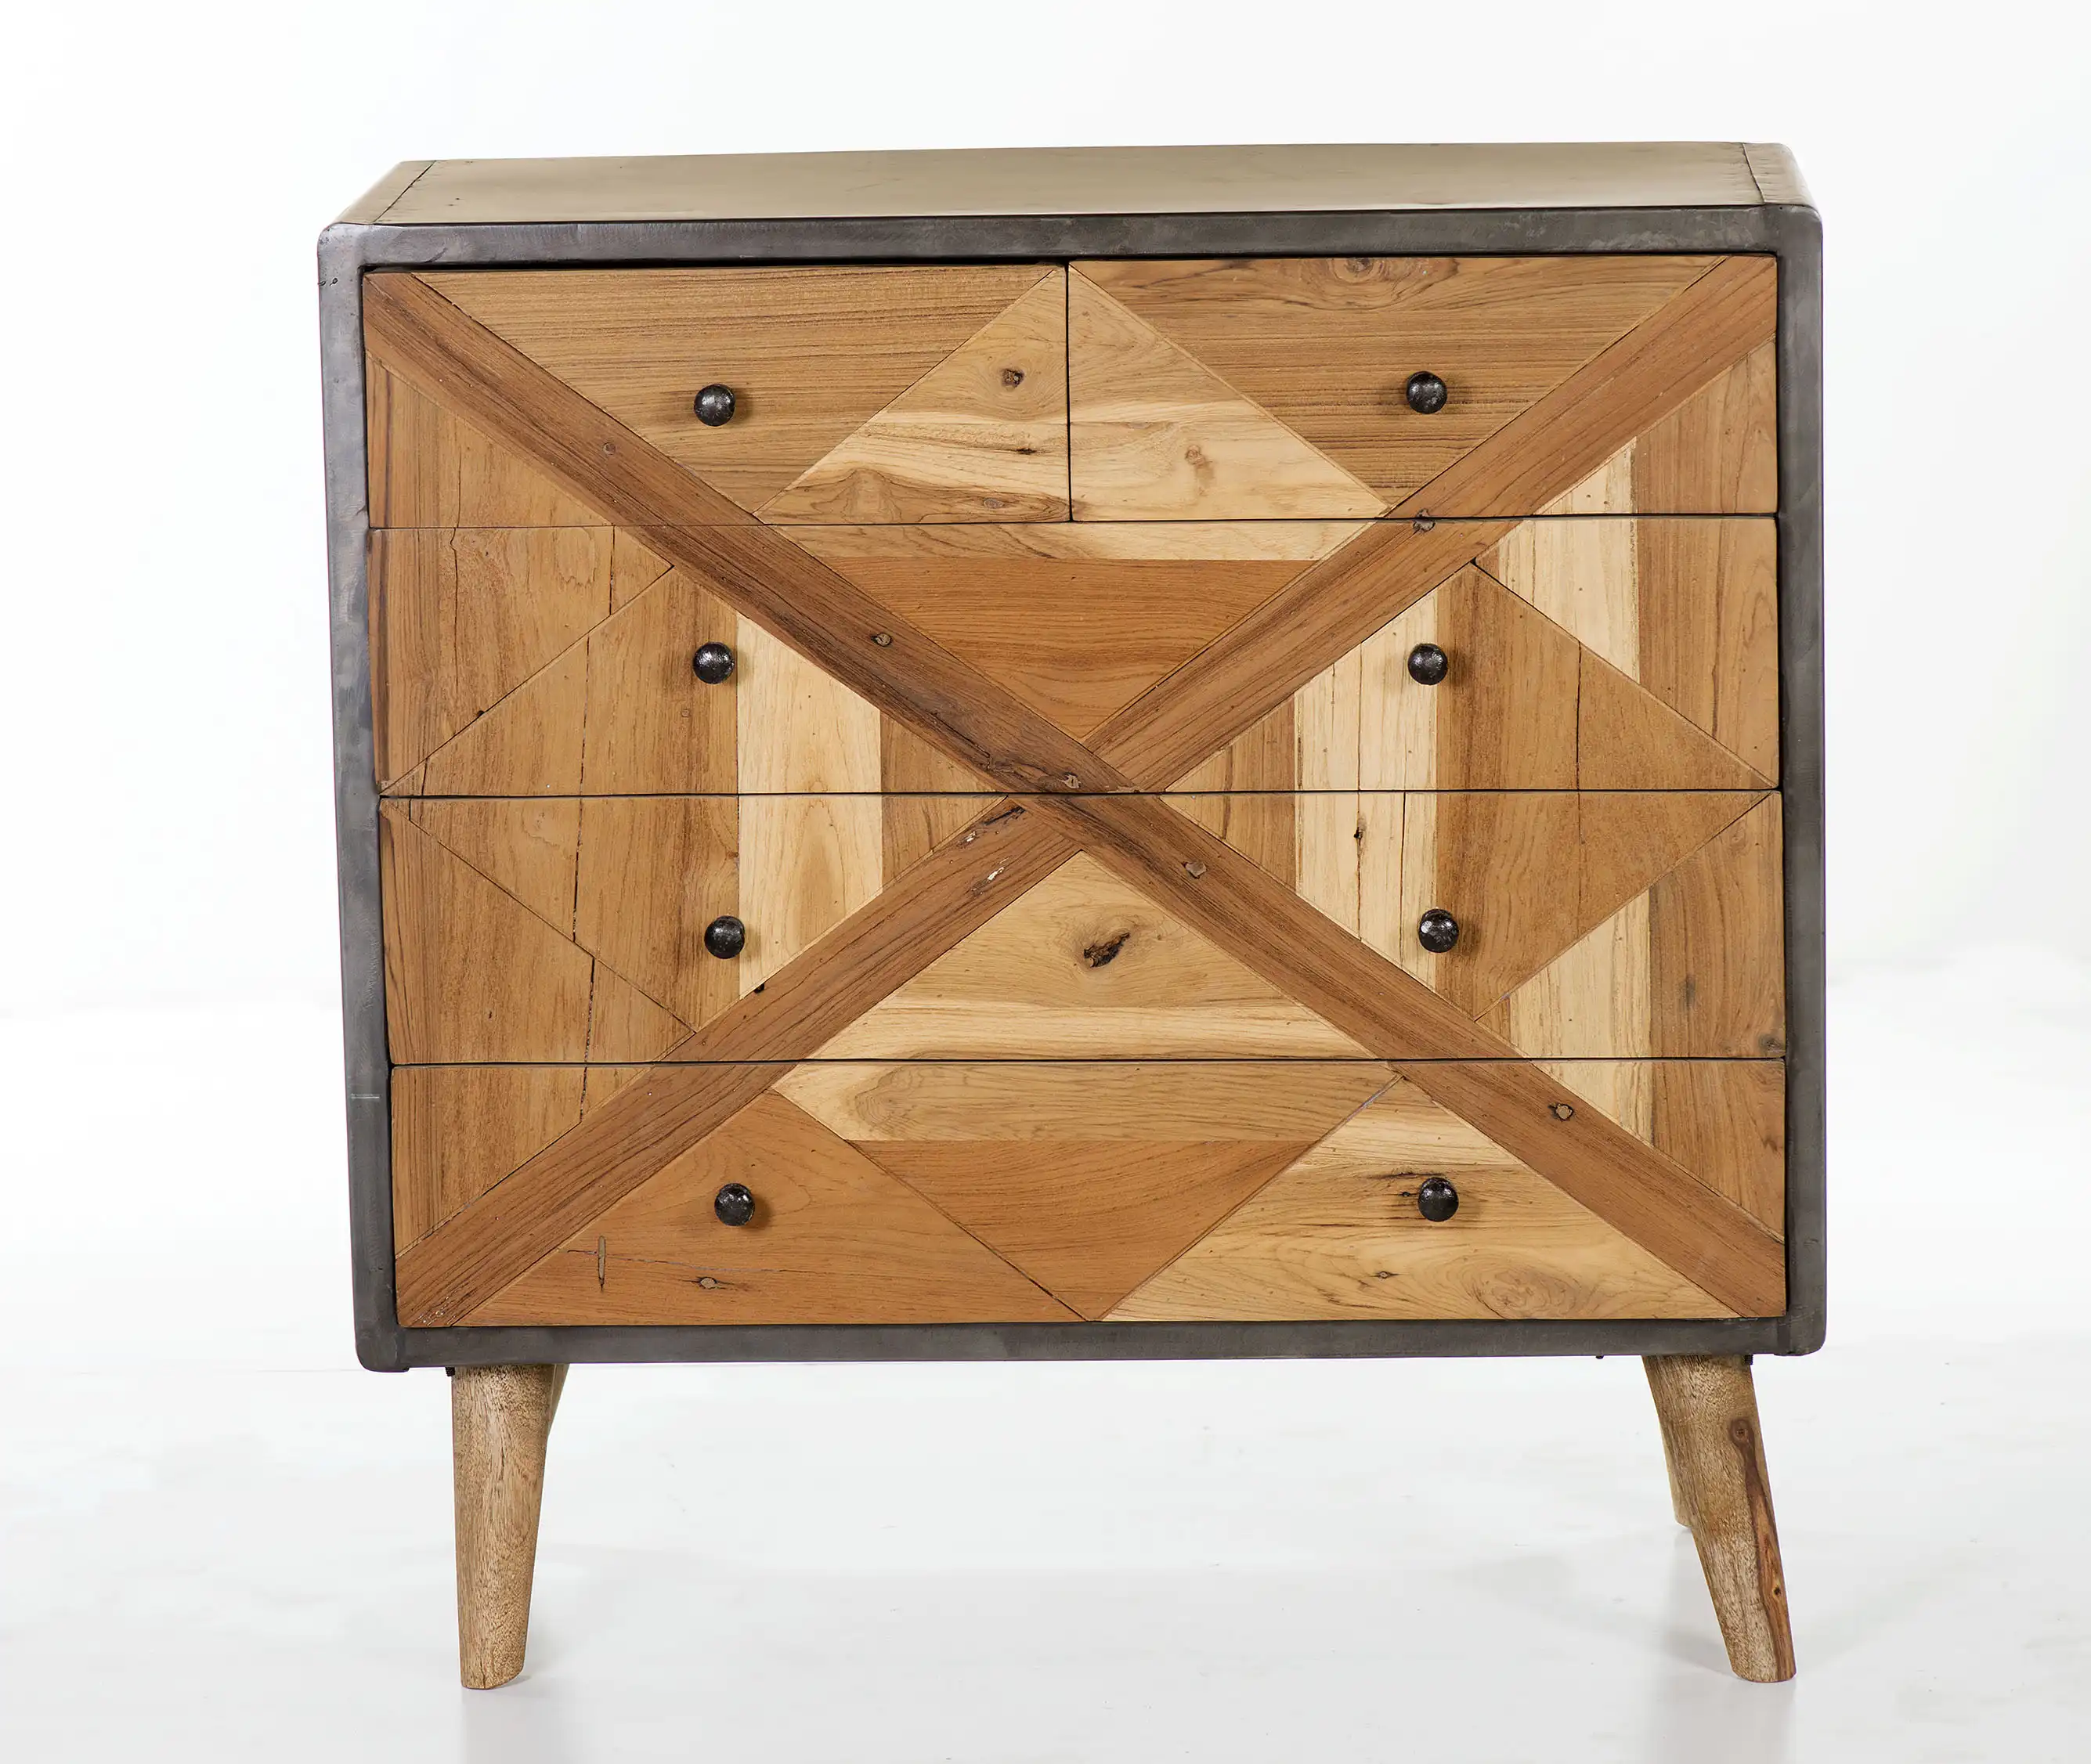 Parket Collection's Wooden Cabinet with 4 Drawers
(Legs KD) - popular handicrafts